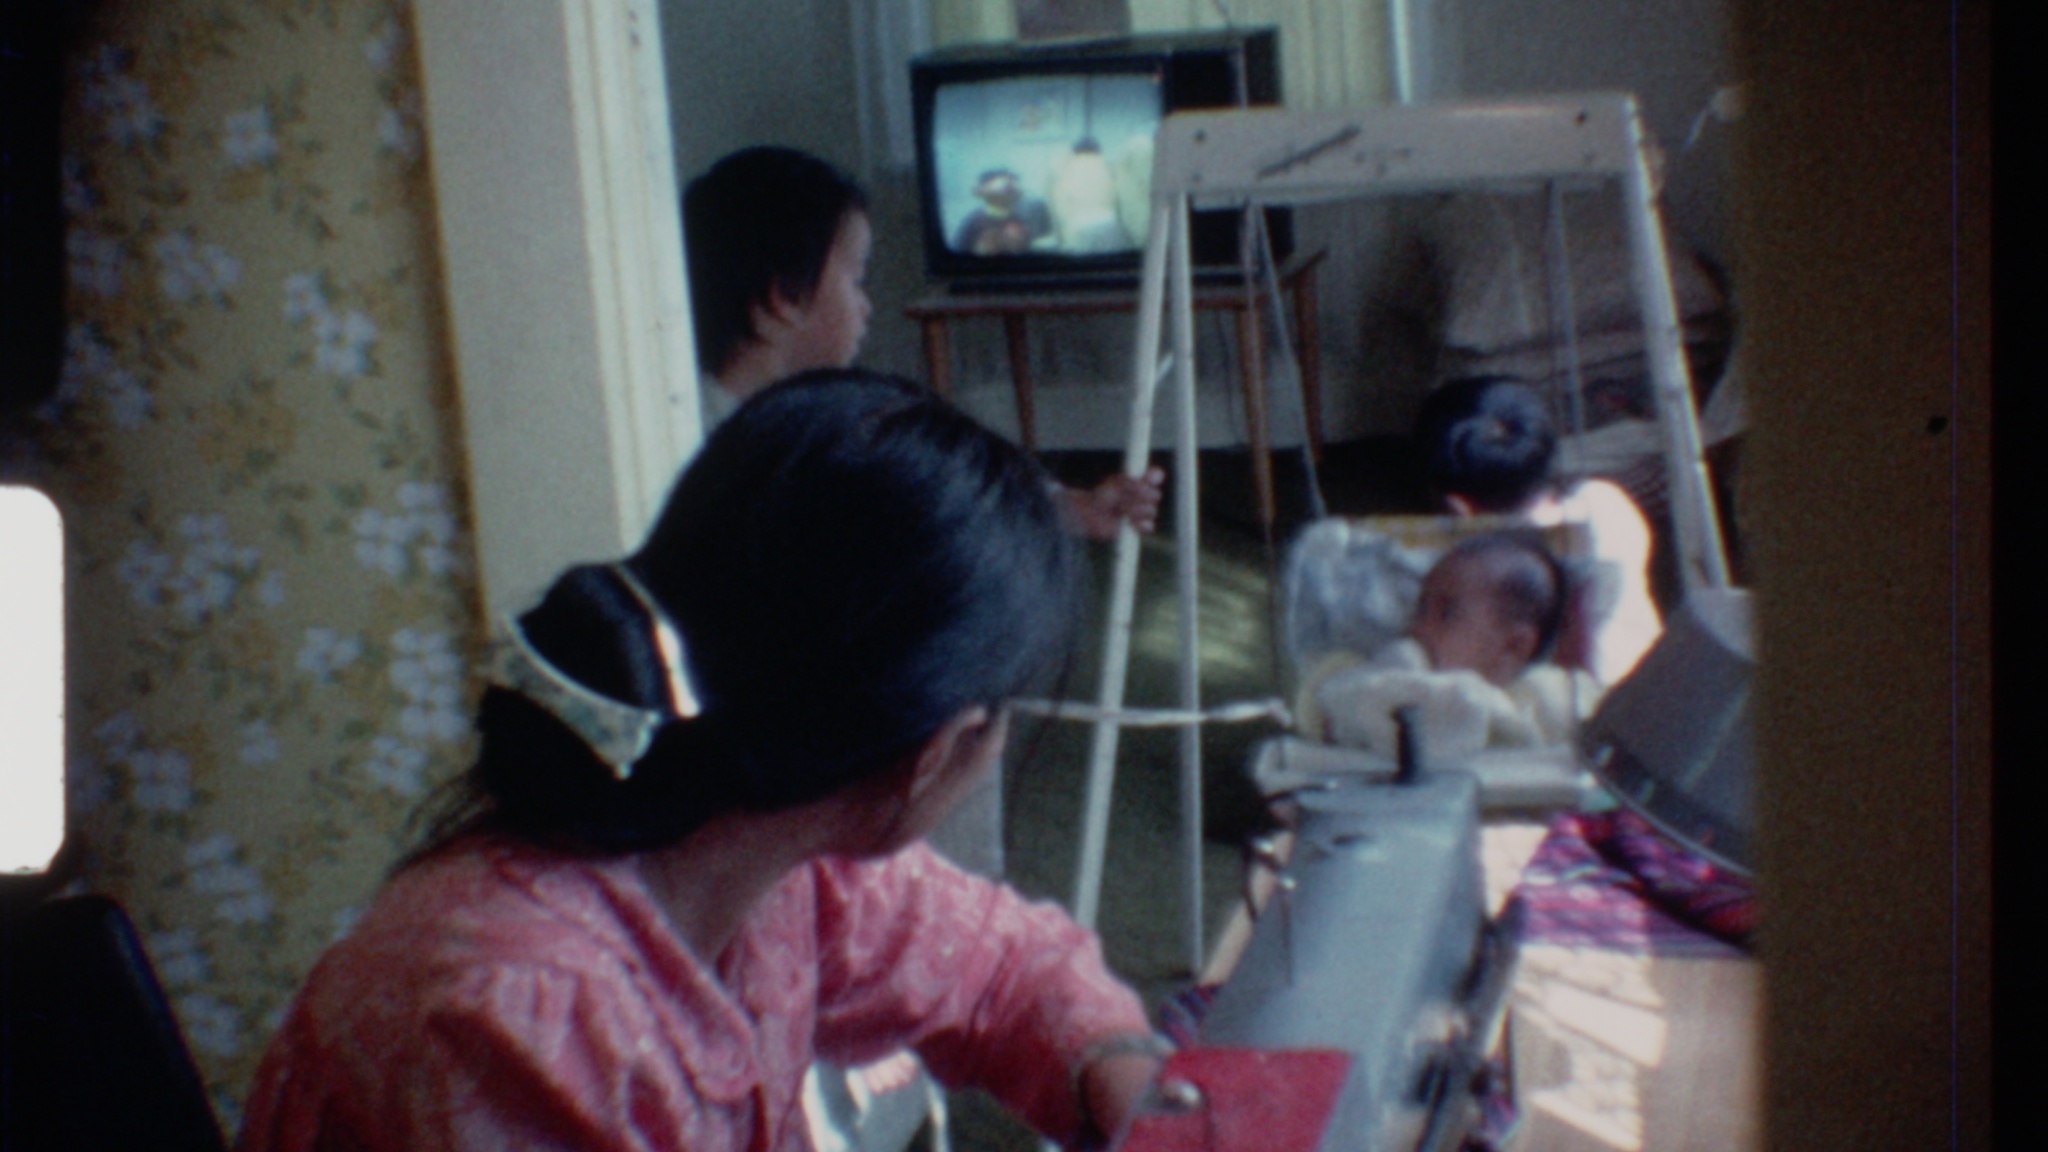 A Vietnamese woman sits at her sewing machine, facing away from the camera, her smooth black hair gathered in a low bun, fastened with a gold clip and white, bow-shaped barrette. The woman’s face is turned toward the living room toward three children: a baby in a swing, pulled by a rope in the hand of a young boy in profile, and the back of a young boy’s head. On a 13 inch box television,  which is perched on a wooden table, Burt and Ernie from Sesame Street are on the screen.